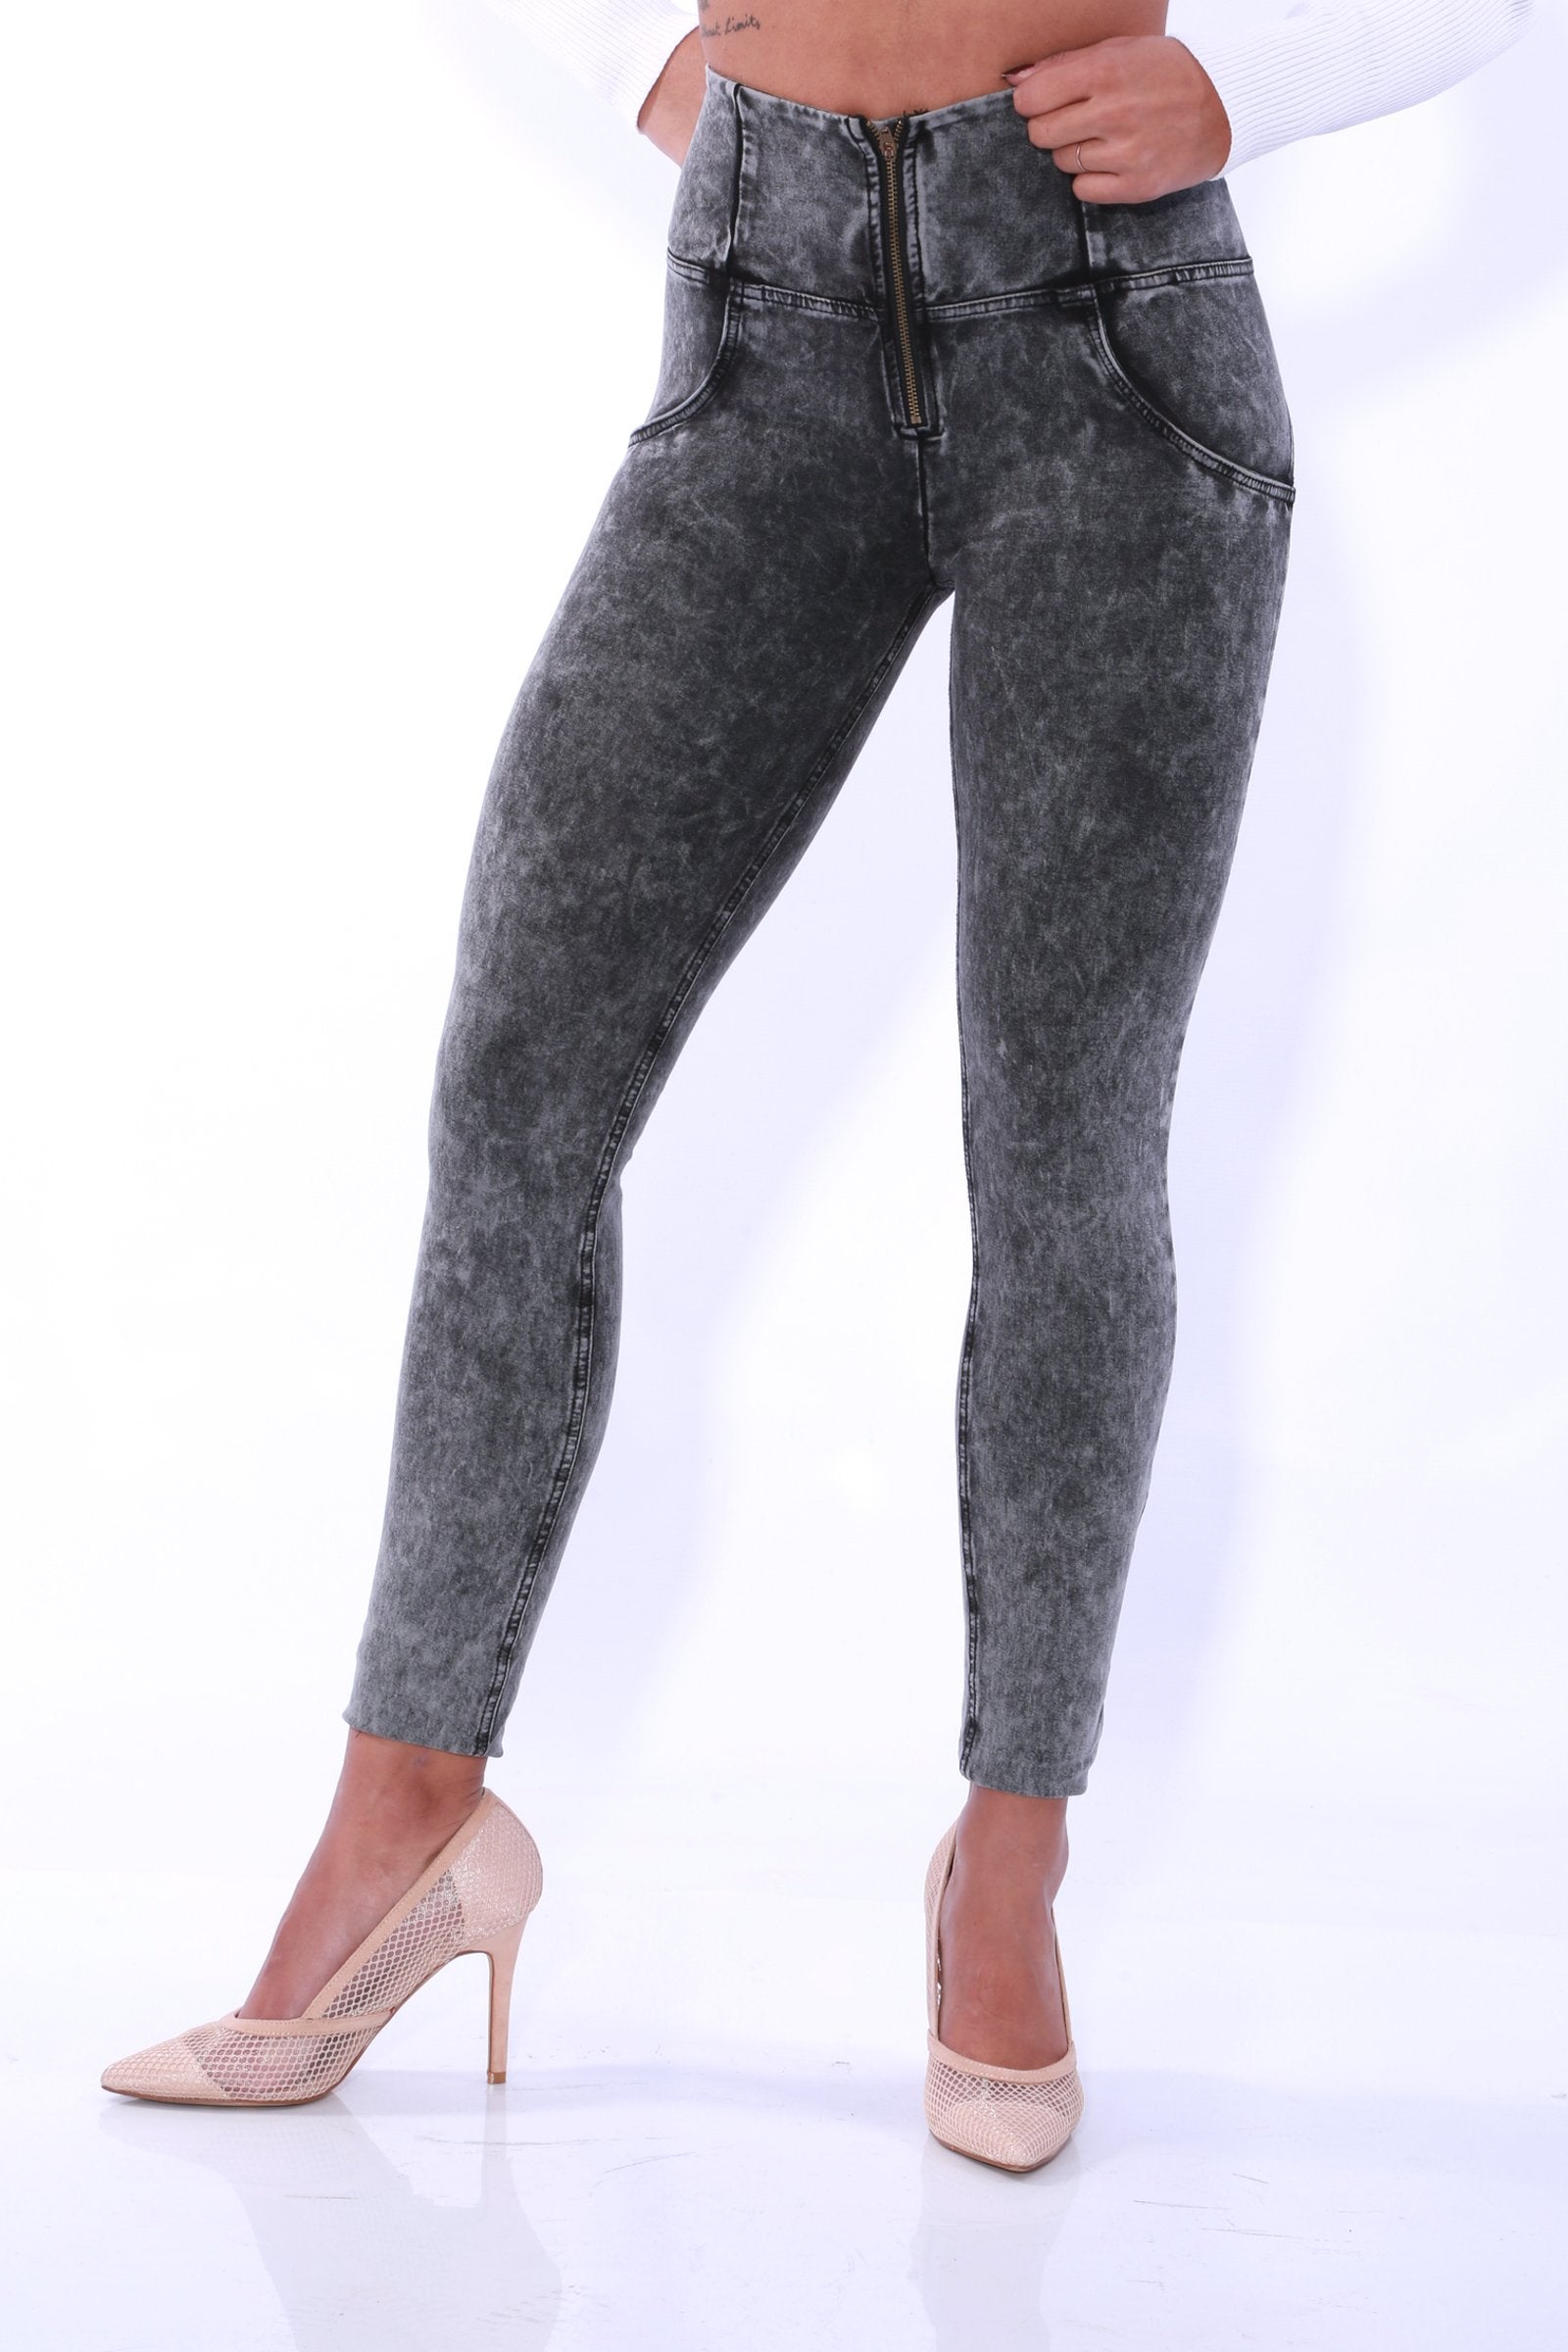 Image of High waist Butt lifting Shaping jeans/Jeggings - Black Stone